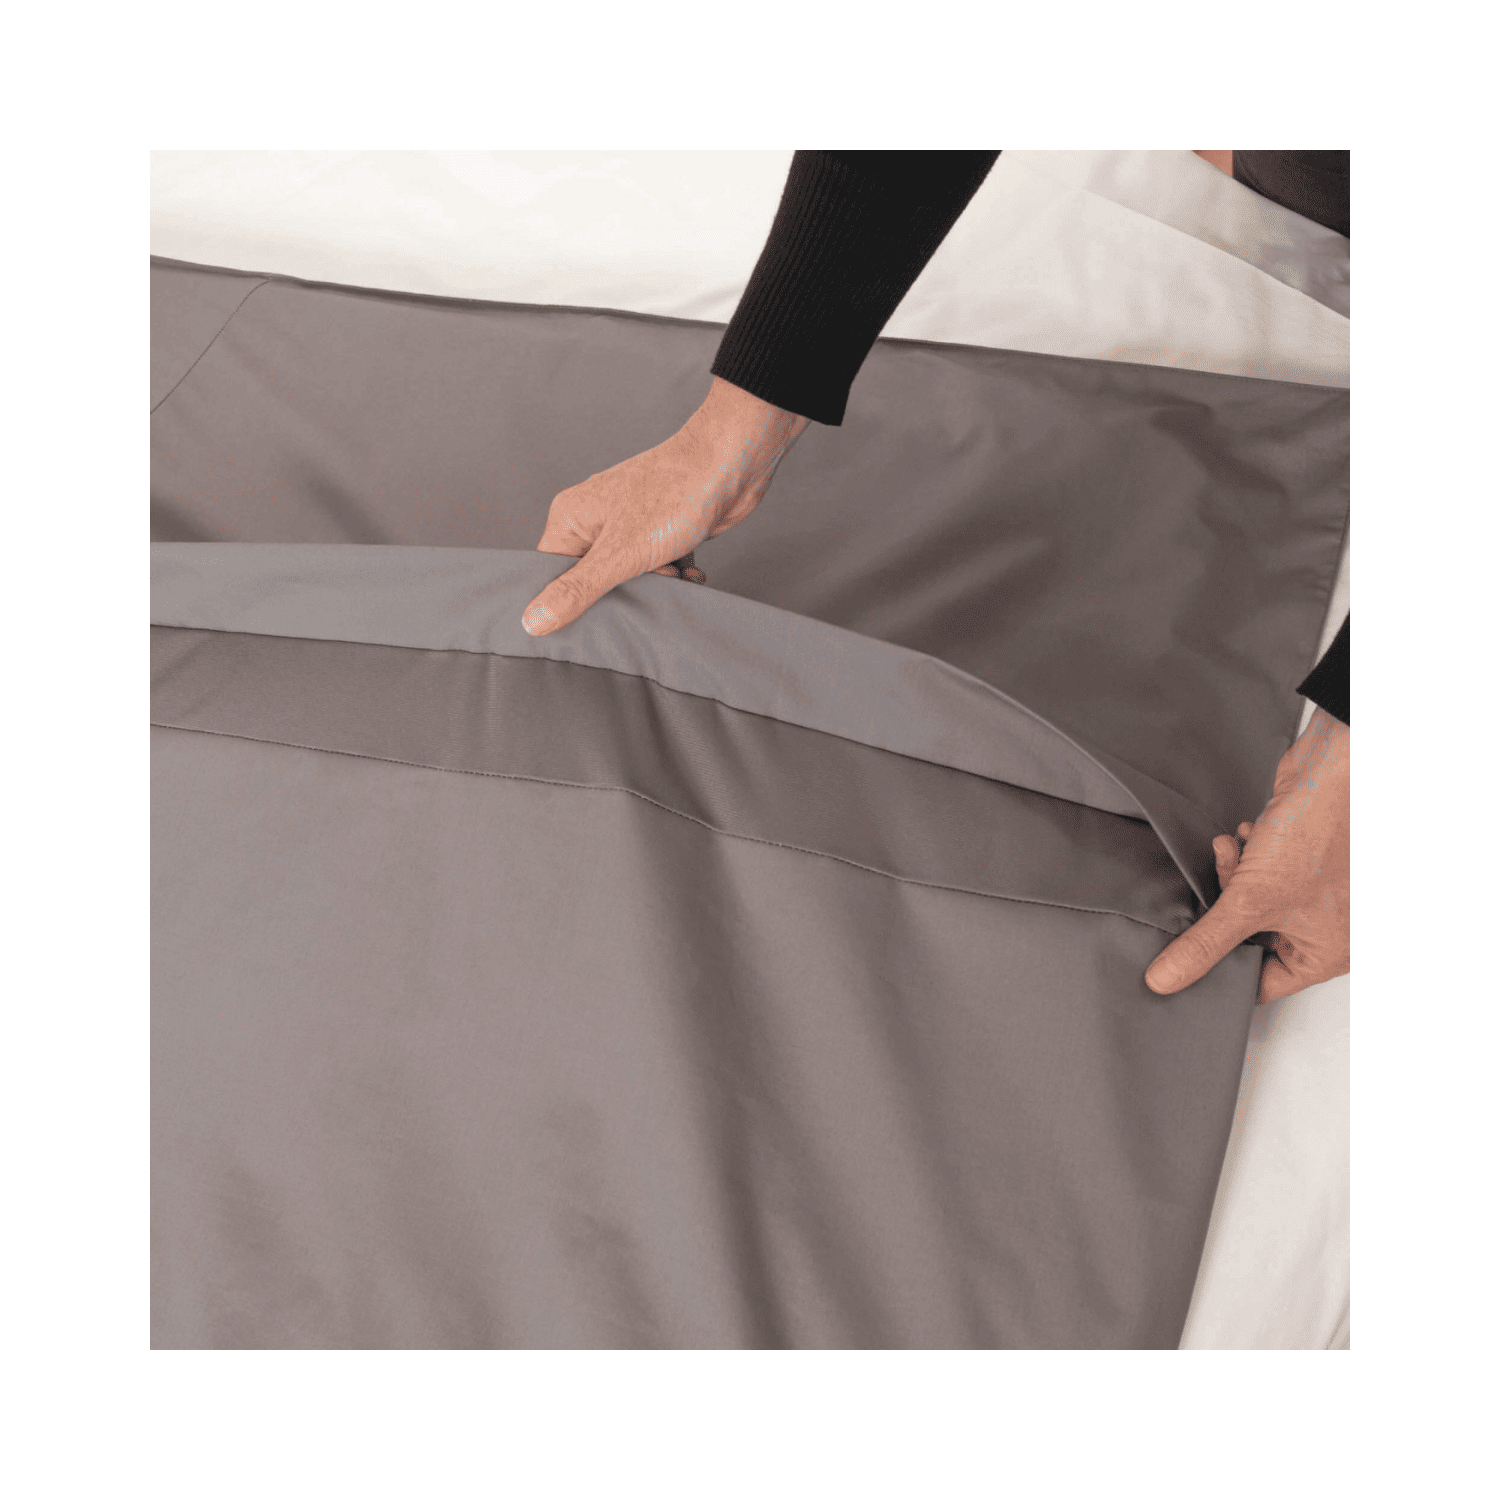 Conni Waterproof Quilt Cover - Charcoal+